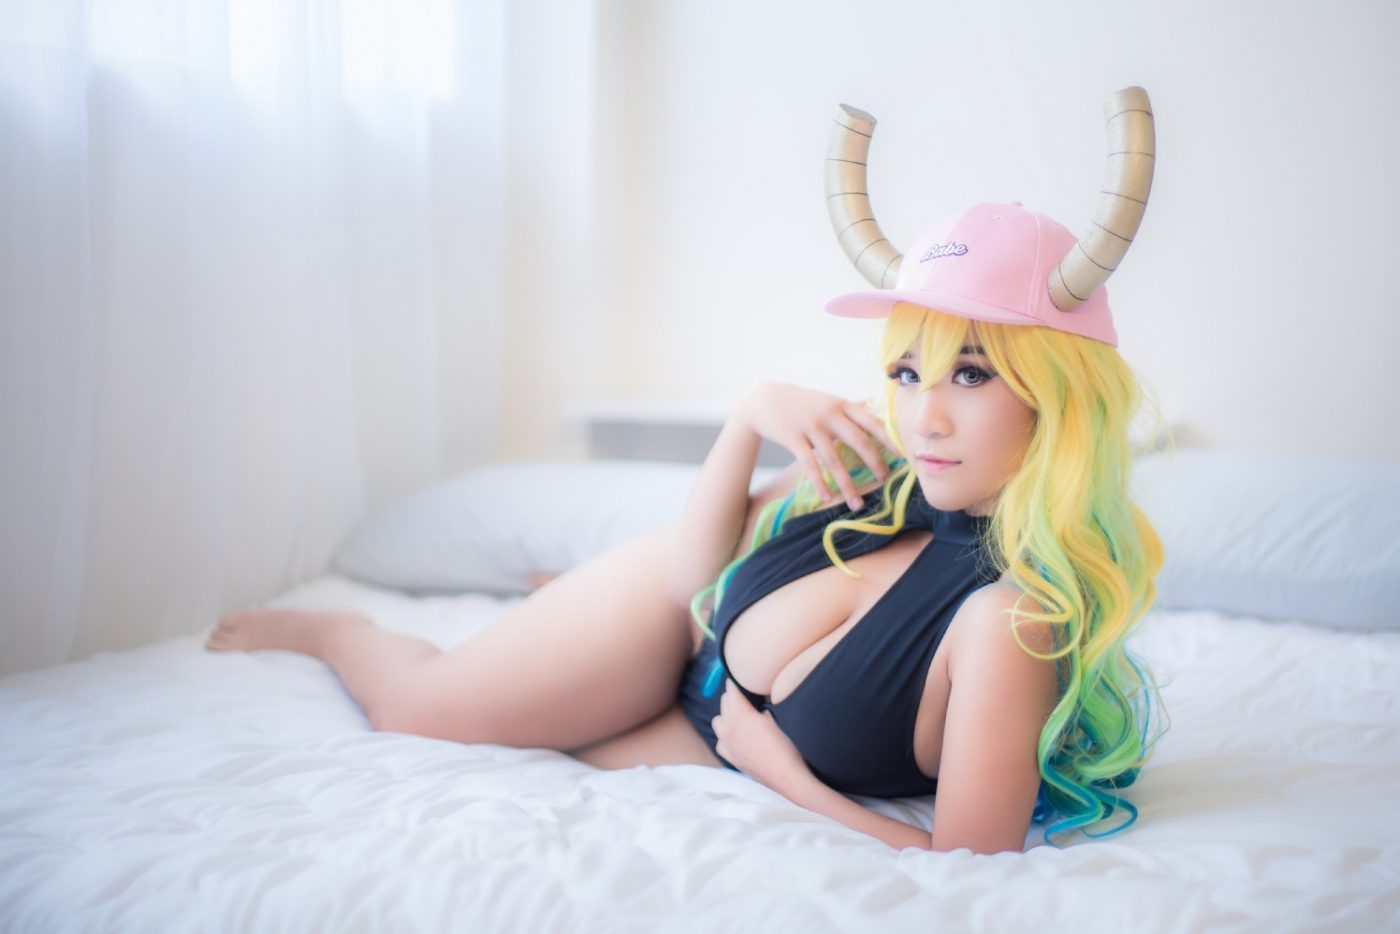 "It takes real dedication and character": An interview with cosplayer Annjela Saet